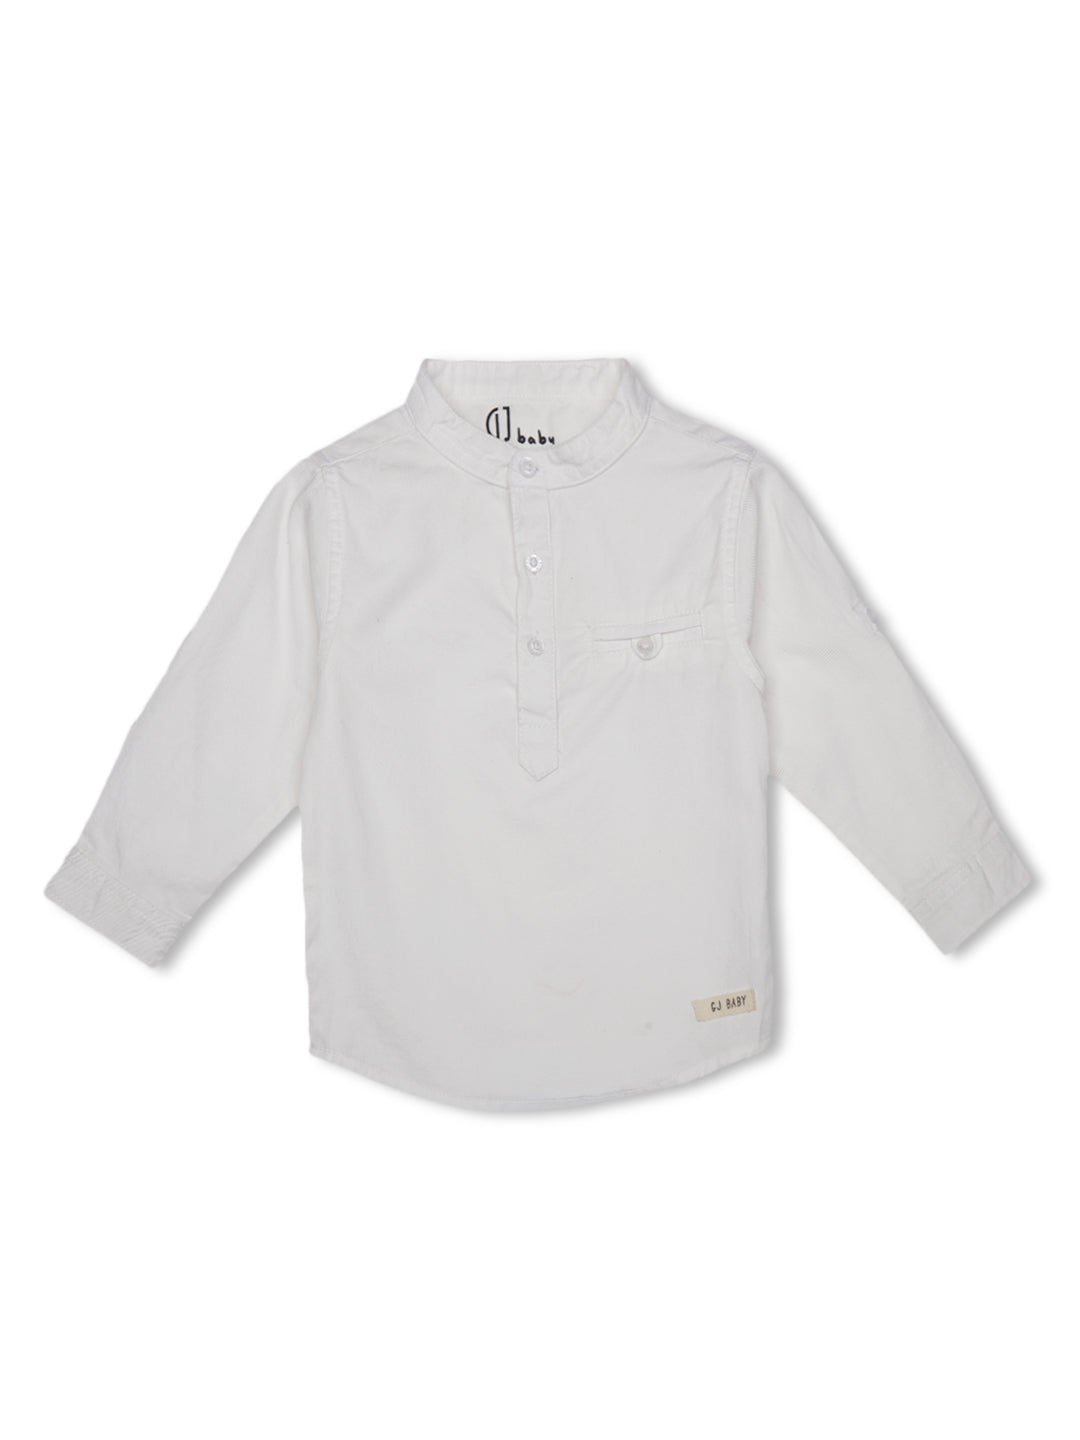 Baby Boys White Cotton Solid Shirt